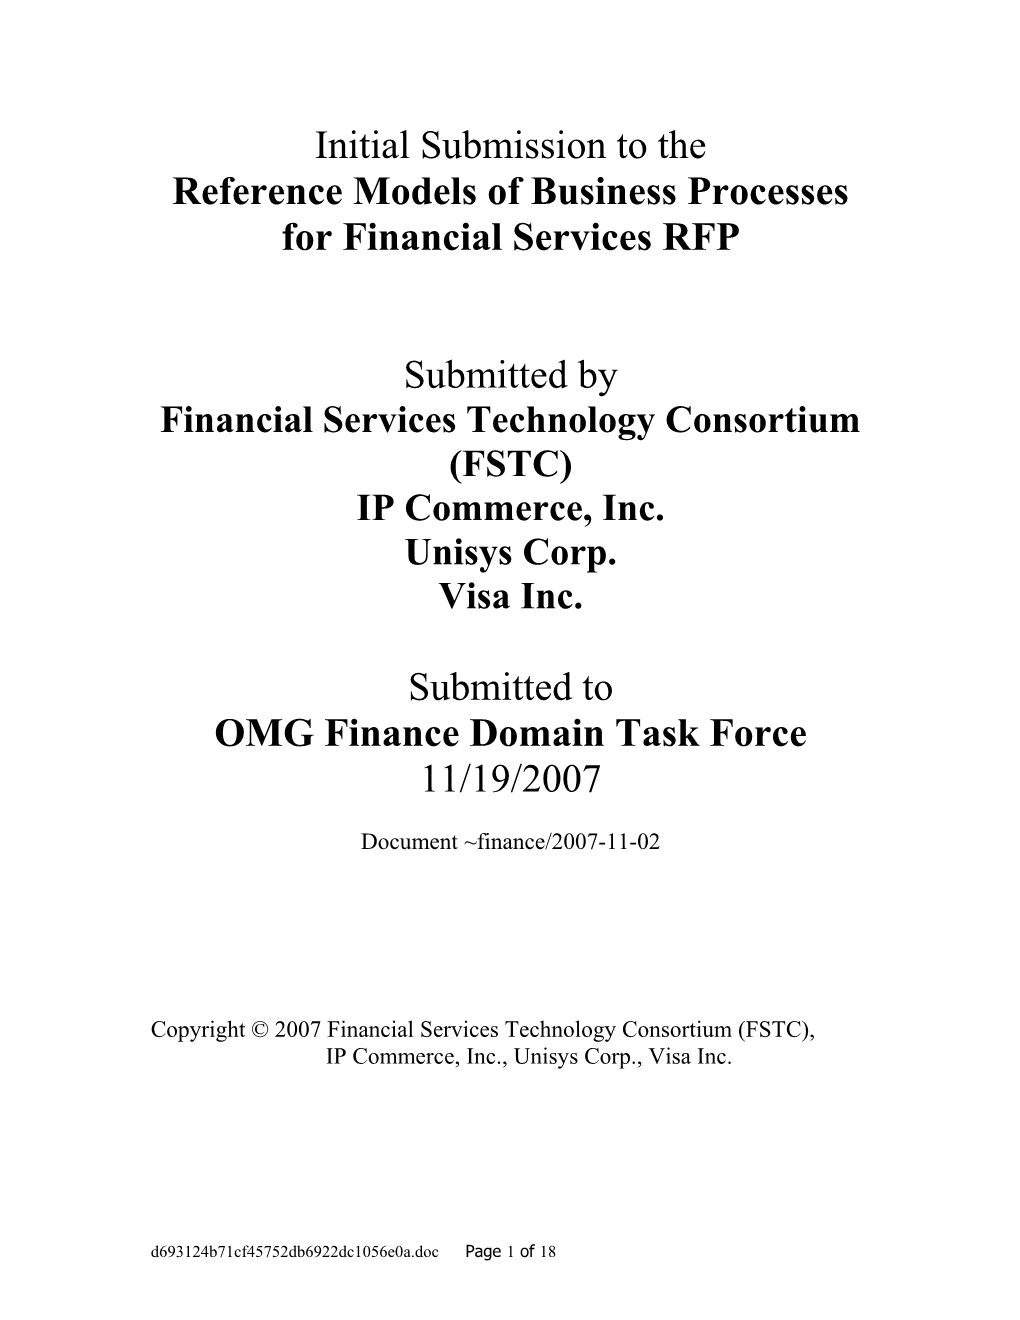 Reference Models of Business Processes for Financial Services